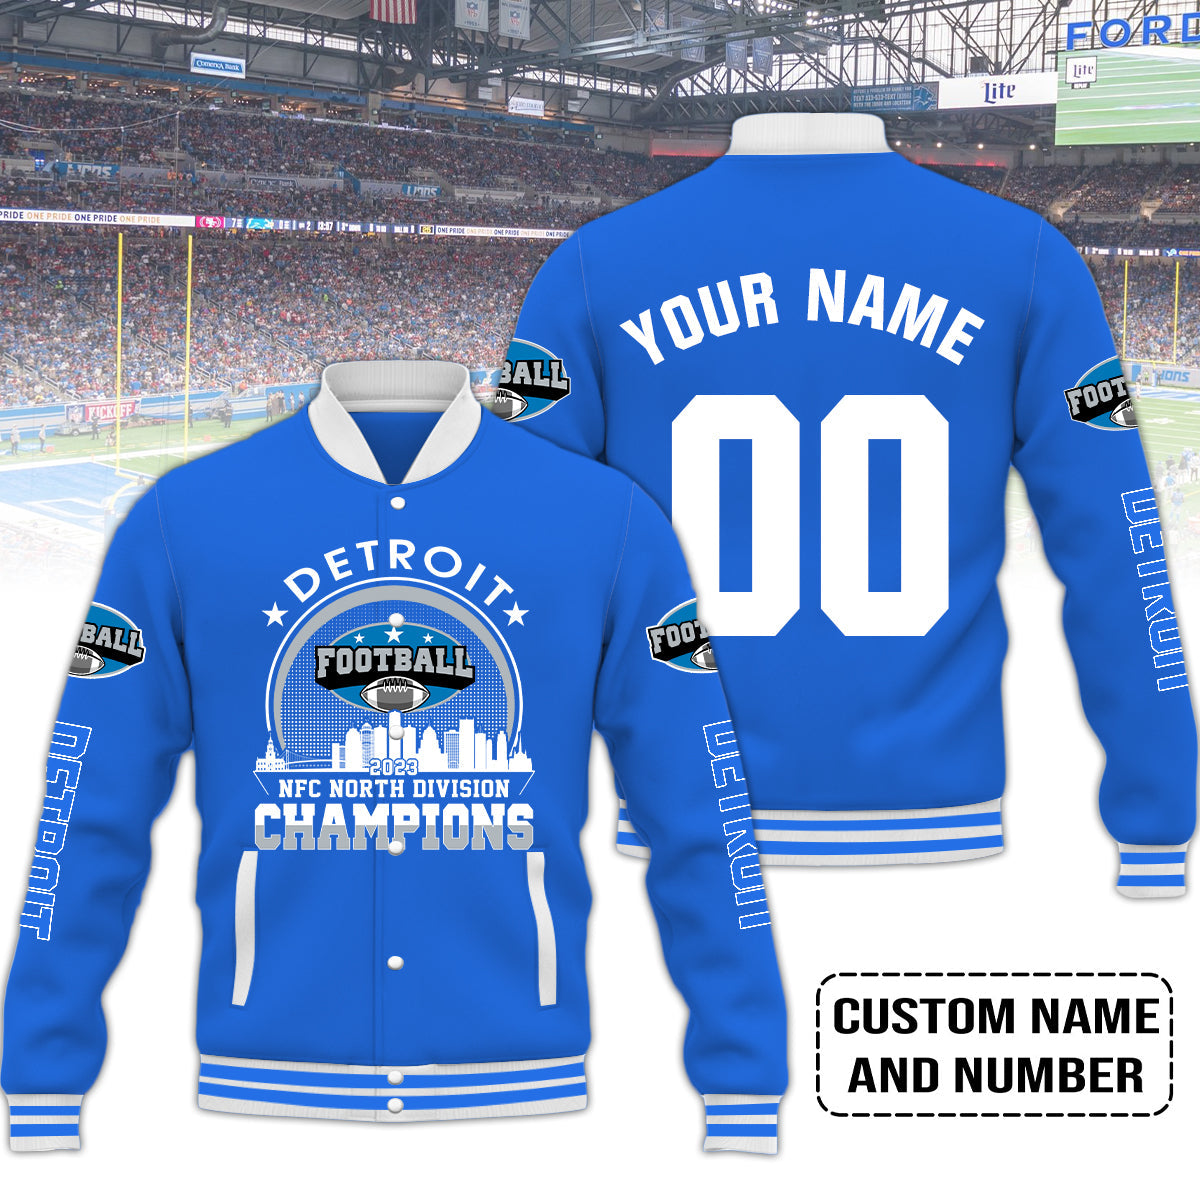 Detroit Football 2023 NFC North Champions Skyline Custom Baseball jacket, Conquered The North Champs Custom Baseball jacket, Detroit Football Fan Gifts